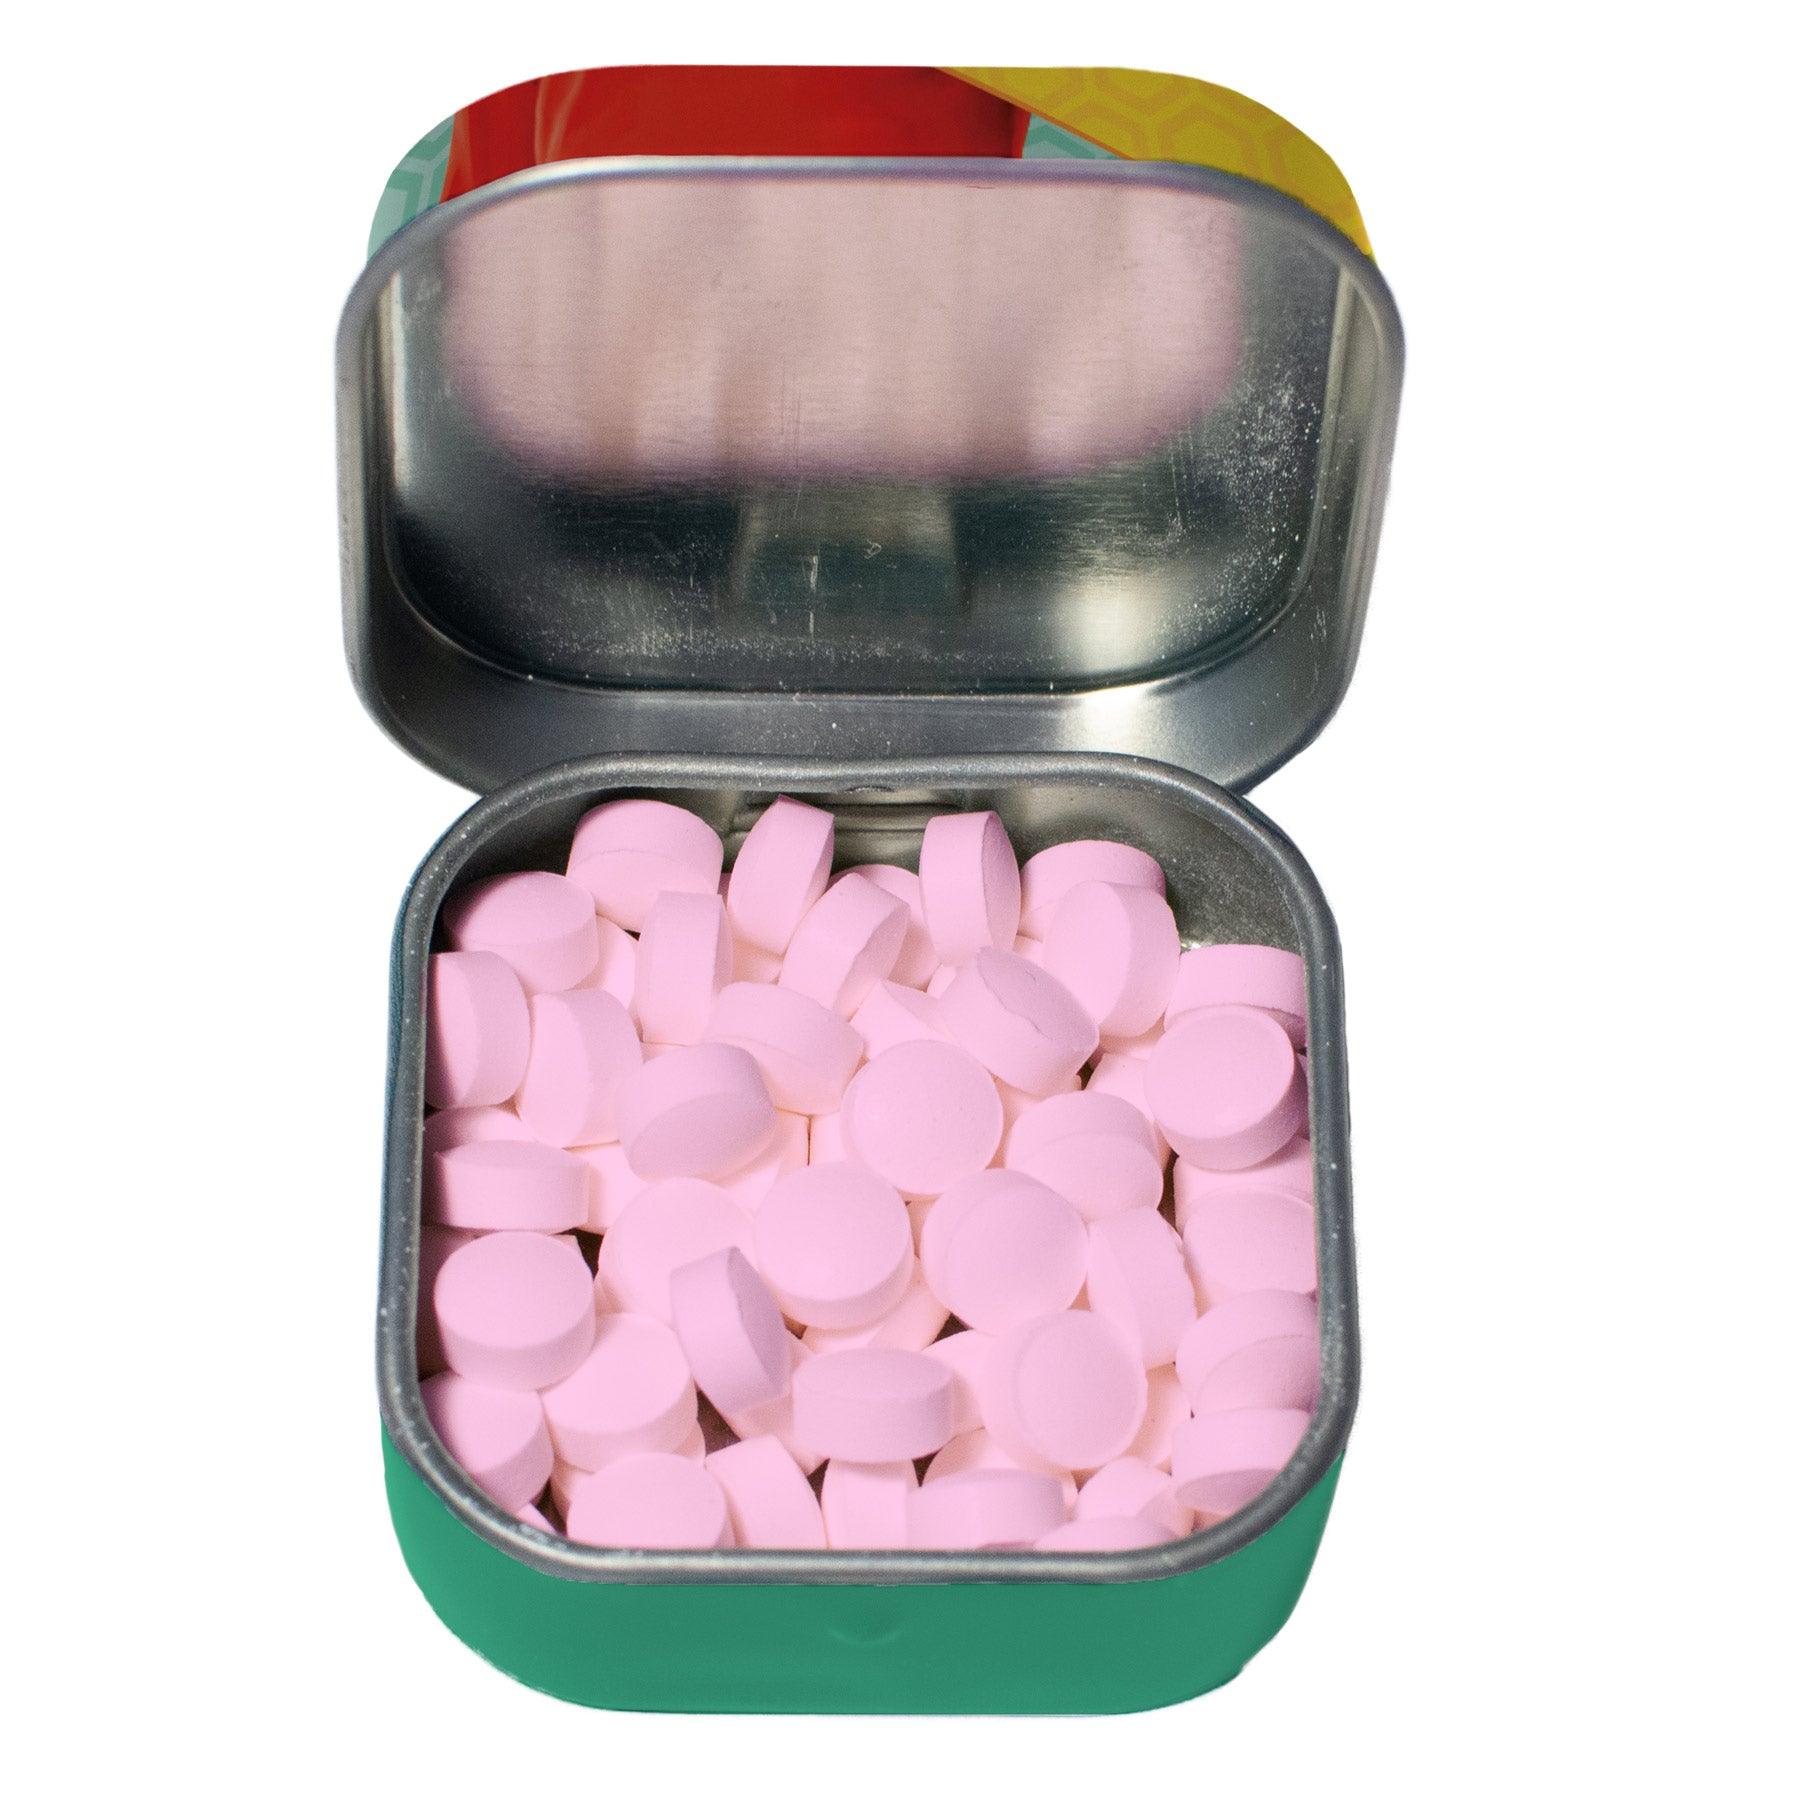 Product photo of Star Trek Dilithium Crystal Mints, a novelty gift manufactured by The Unemployed Philosophers Guild.